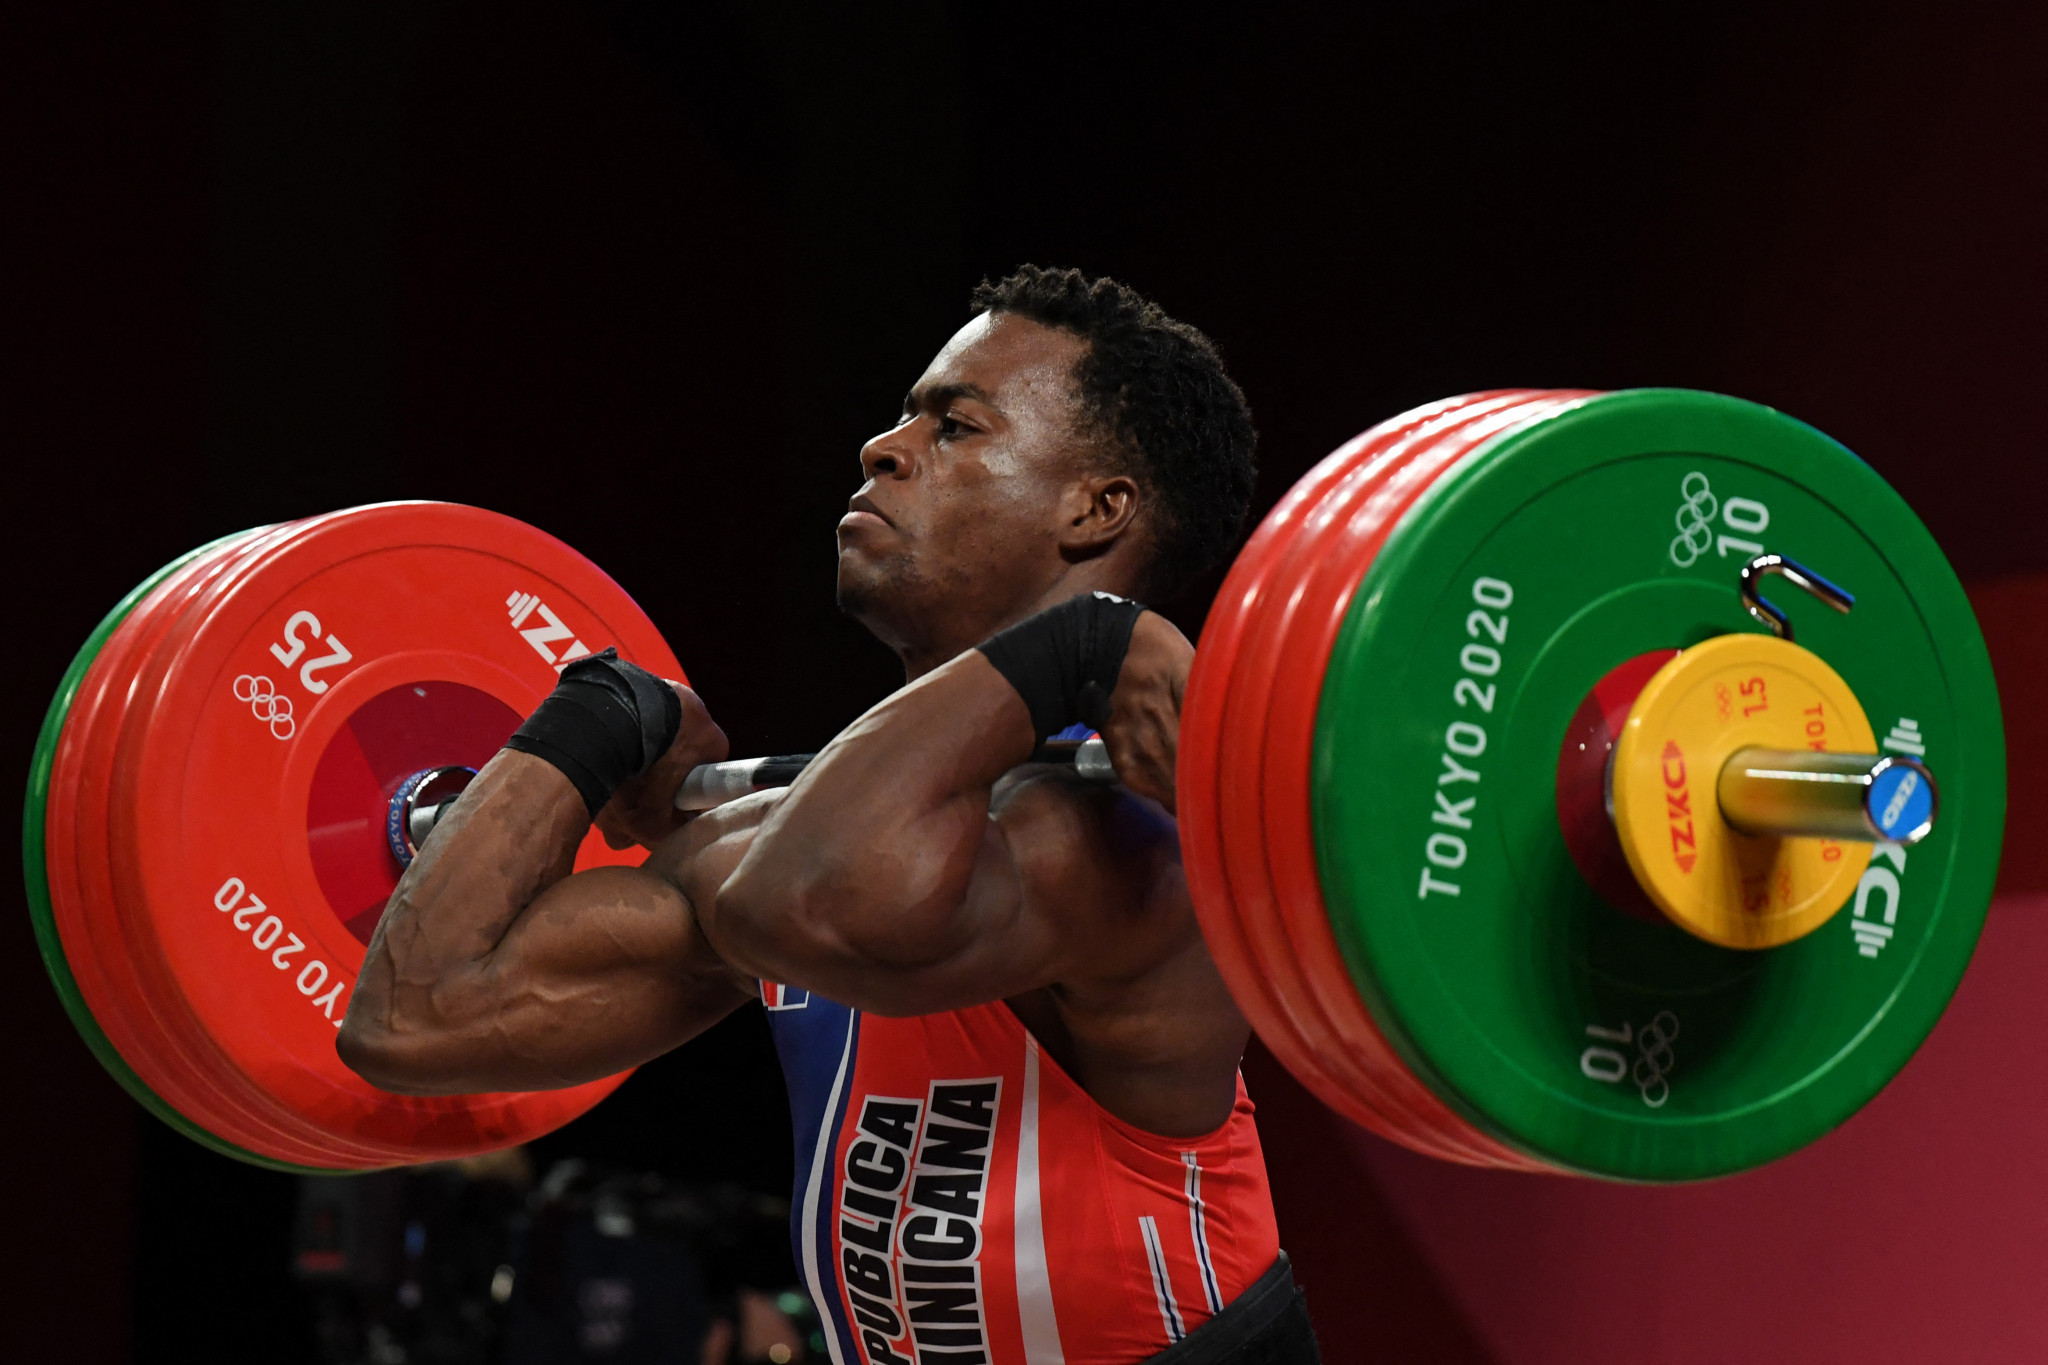 Tokyo weightlifting medallist Bonnat suspended for doping - but IWF stays upbeat